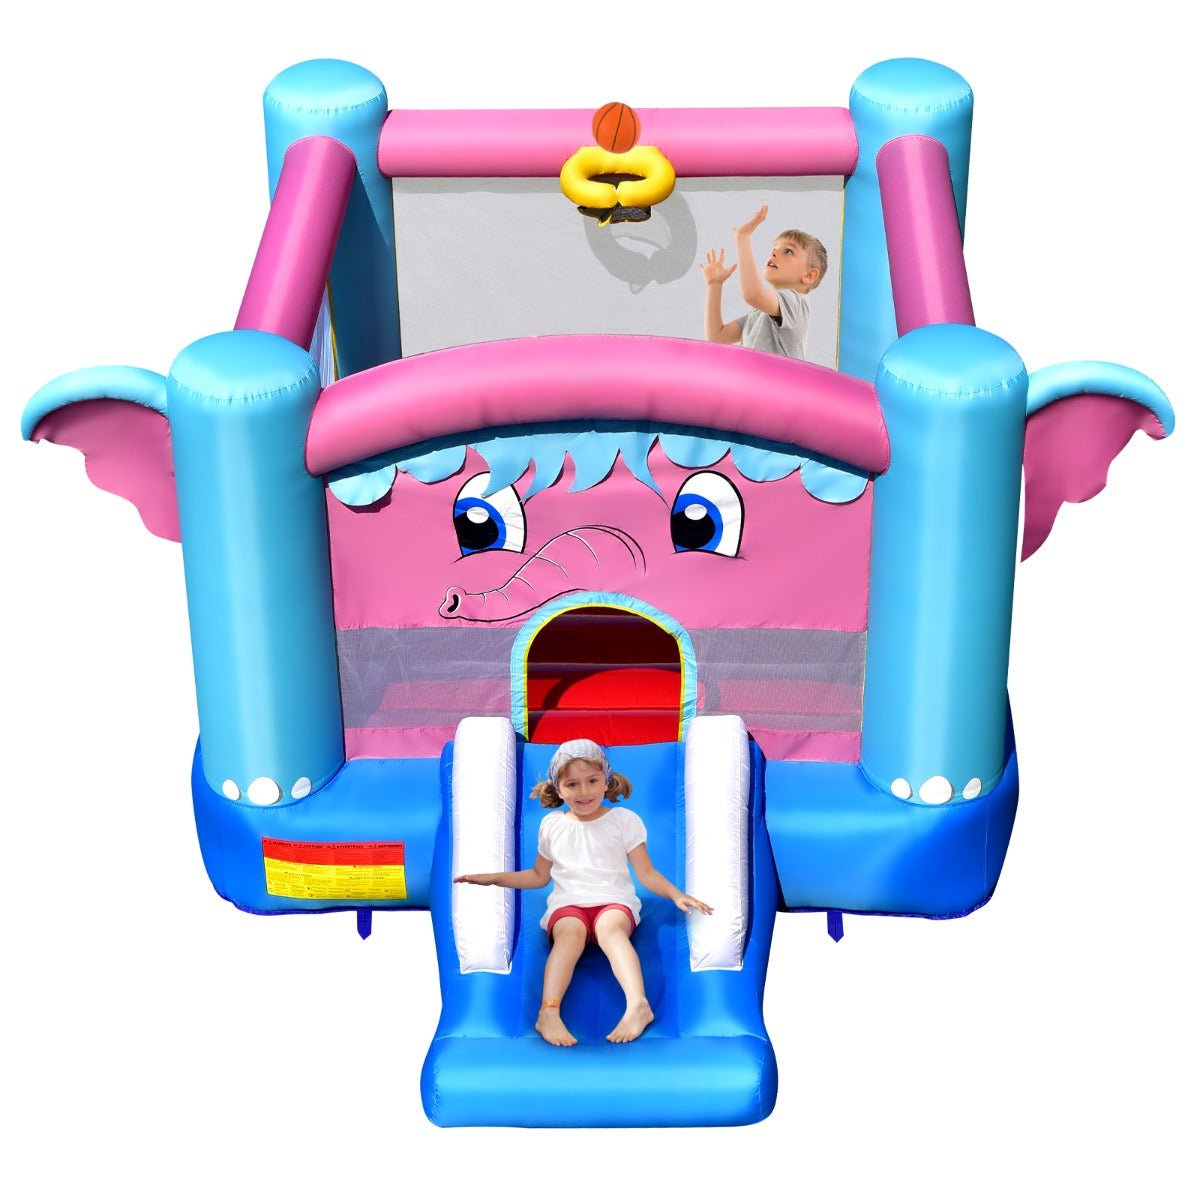 Elephant Theme Inflatable Castle - 3-in-1 Playtime Excitement